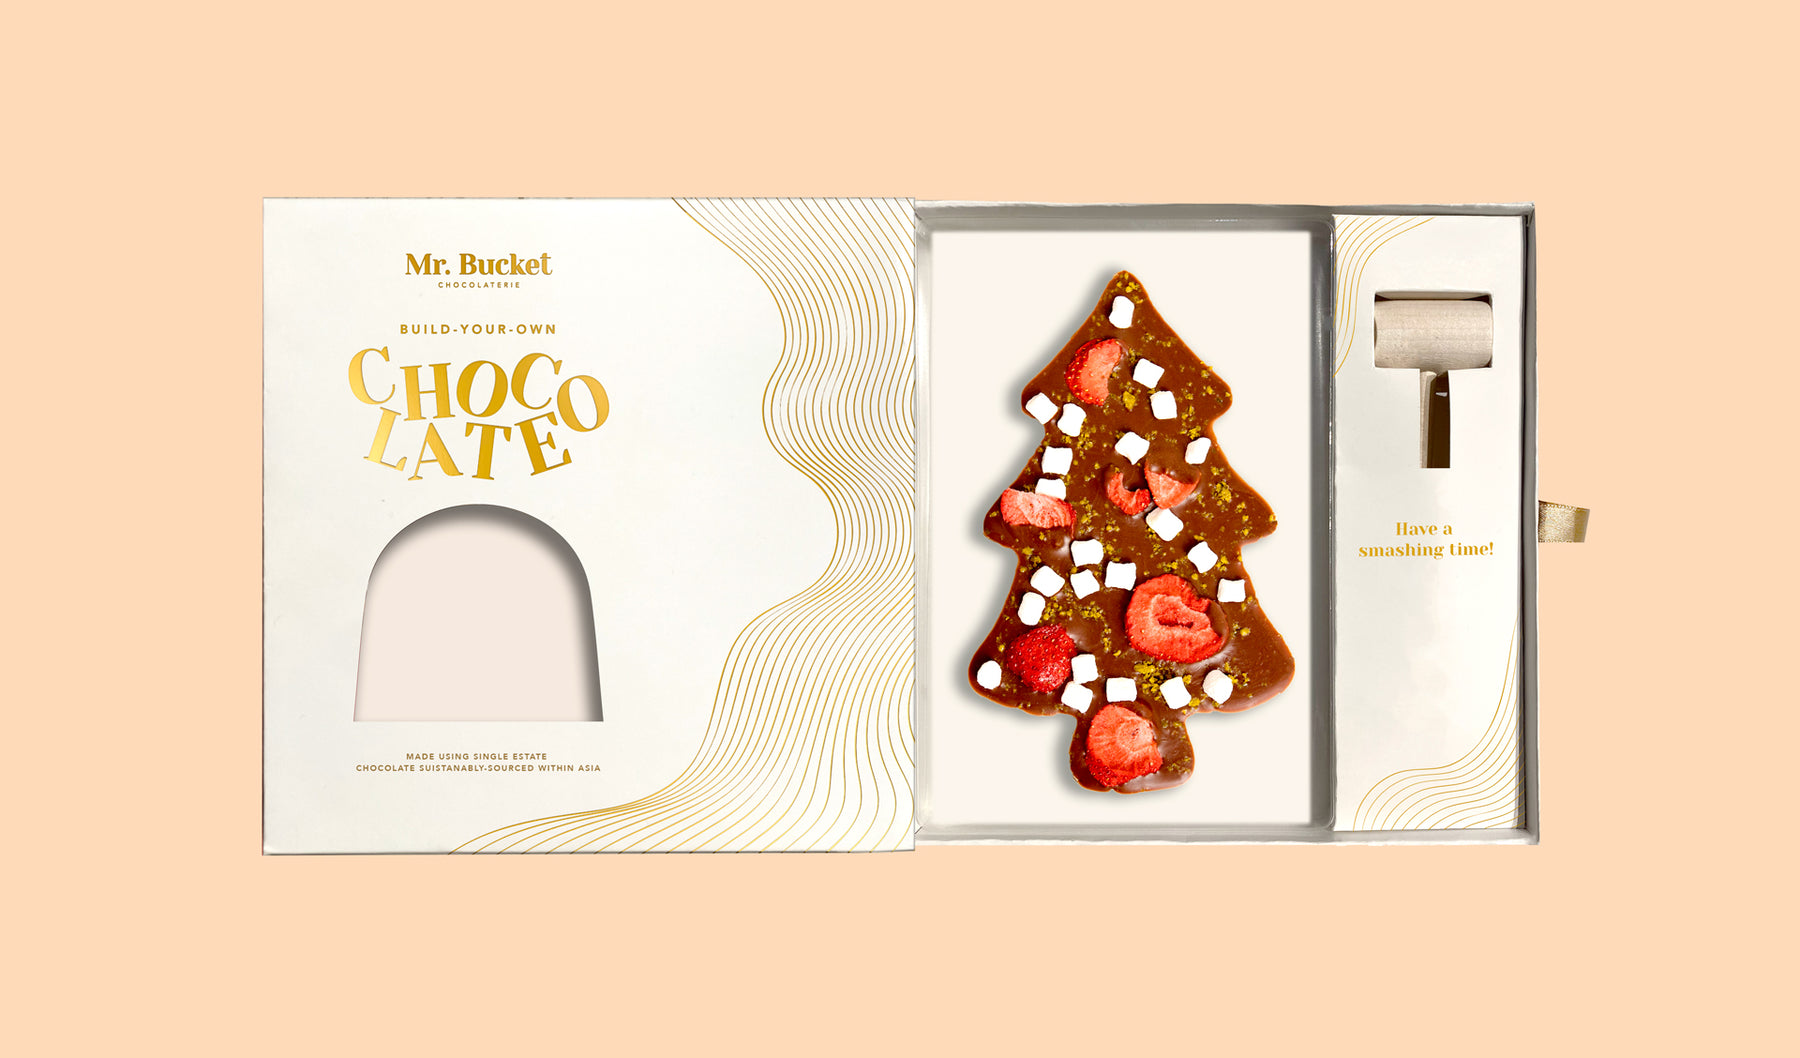 Build-Your-Own Chocolate Slab Gift Voucher